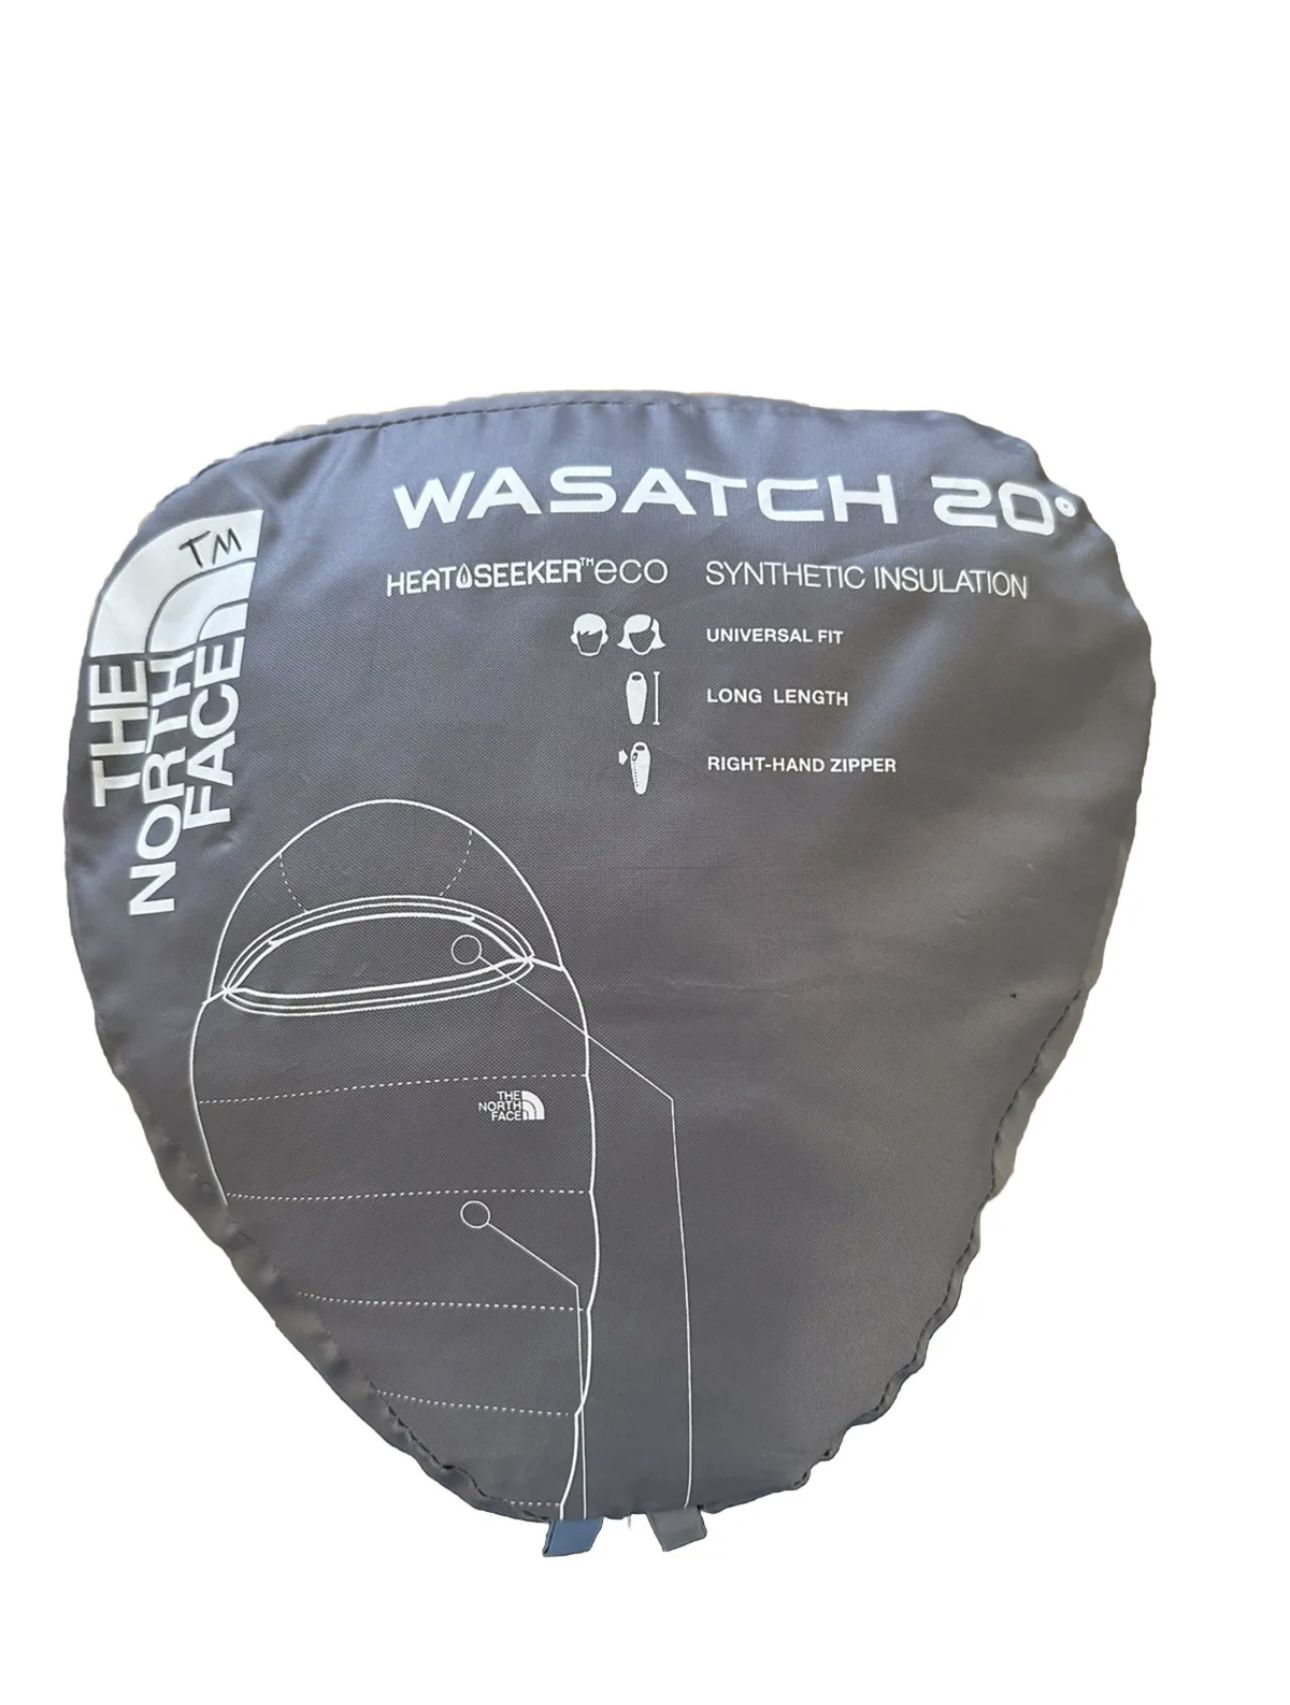 north face wasatch unisex sleeping bag 20 F Long